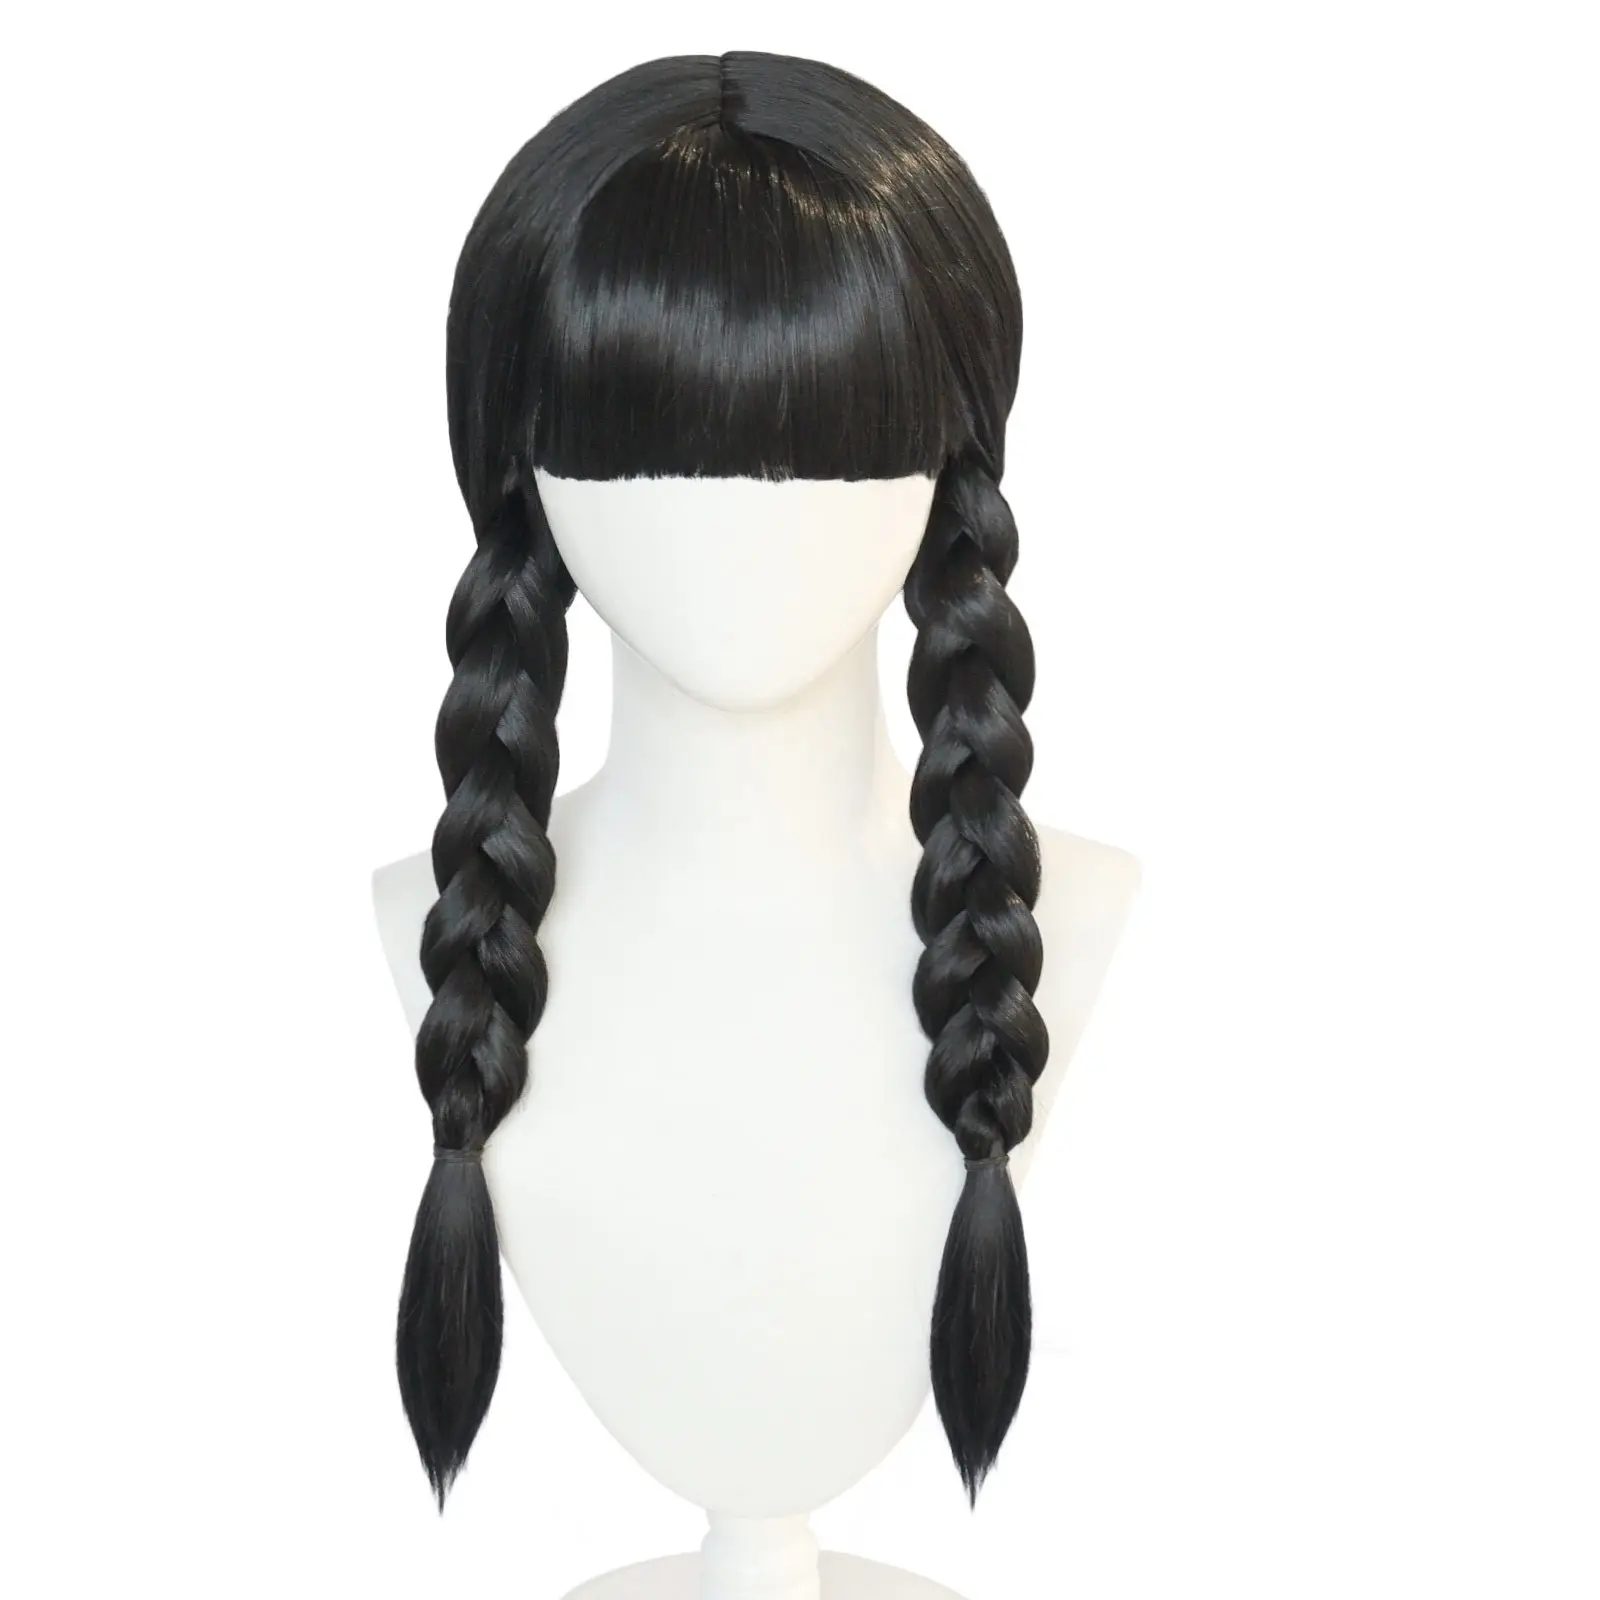 Anogol Synthetic Wednesday Addams Cosplay Wig Movie The Addams Family Long Black Braids Hair with Bangs for Halloween Party